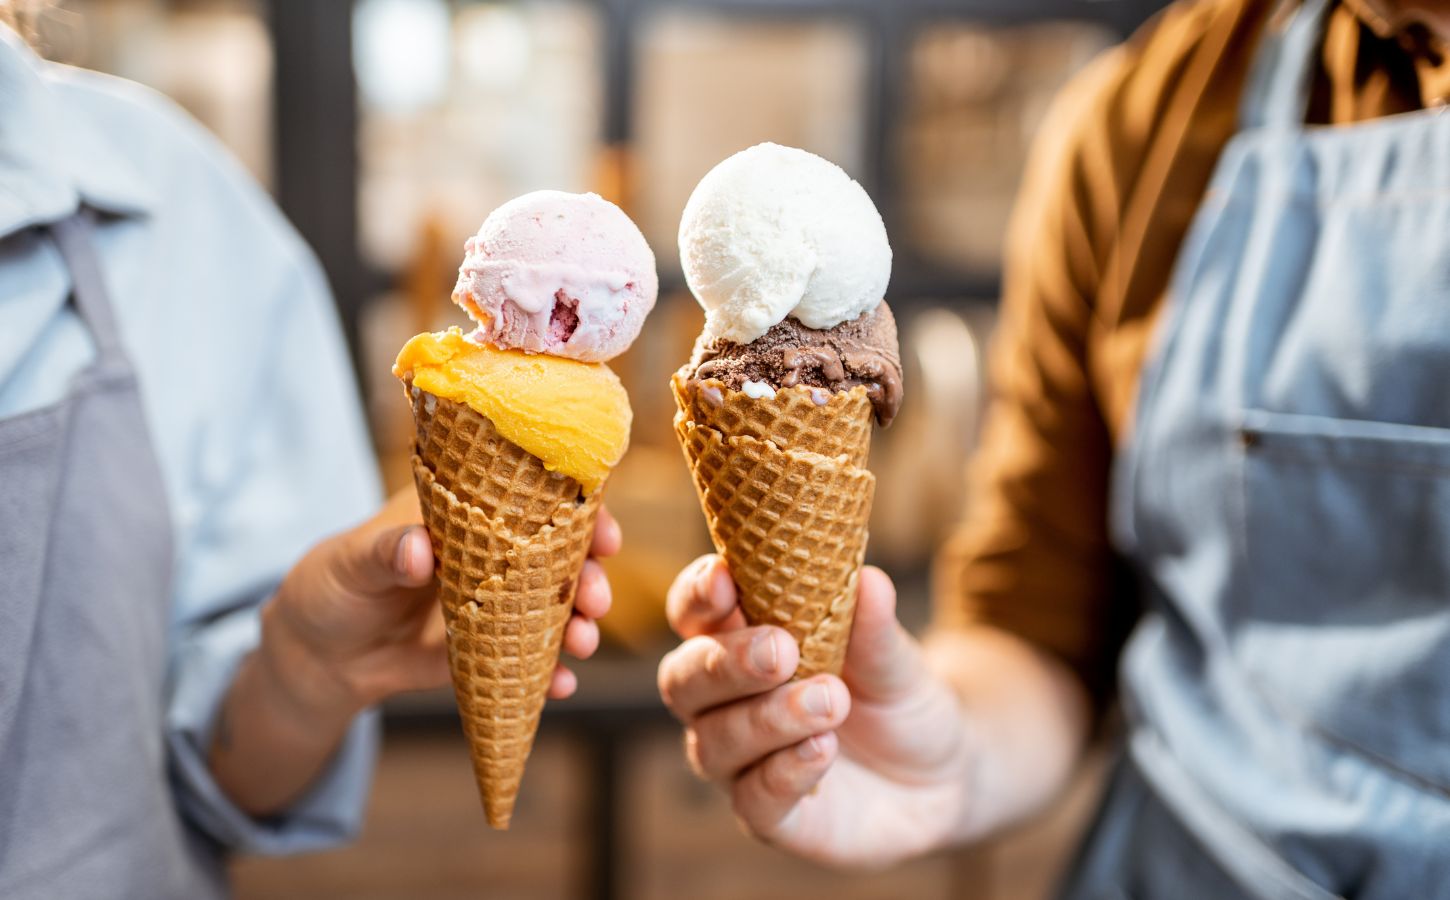 Hands holding two ice cream cones containing scoops of dairy-free ice cream